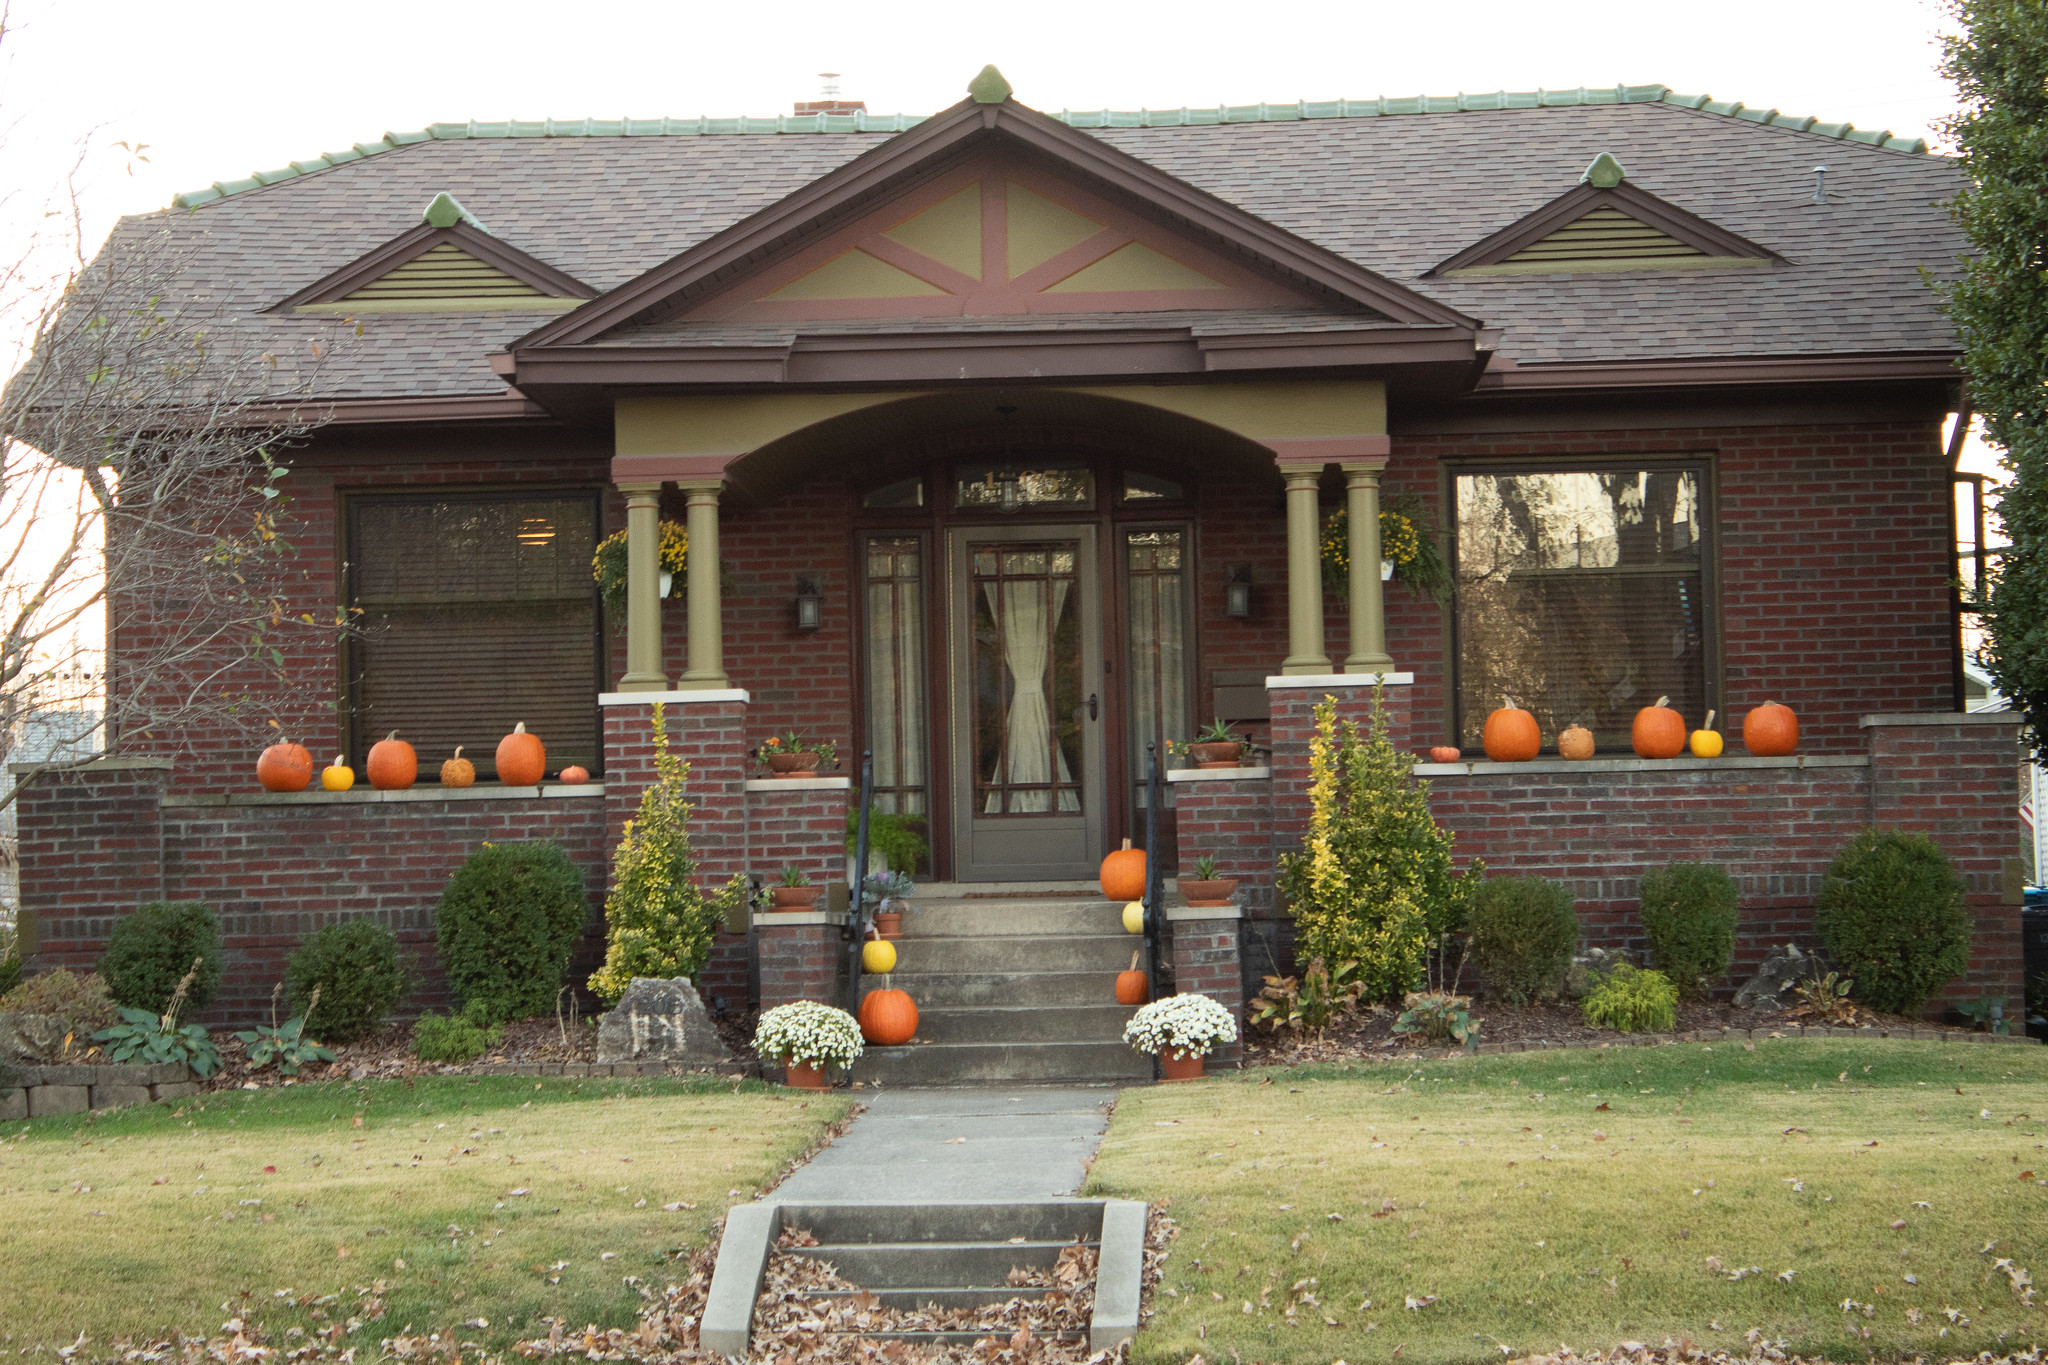 House with Halloween decorations up